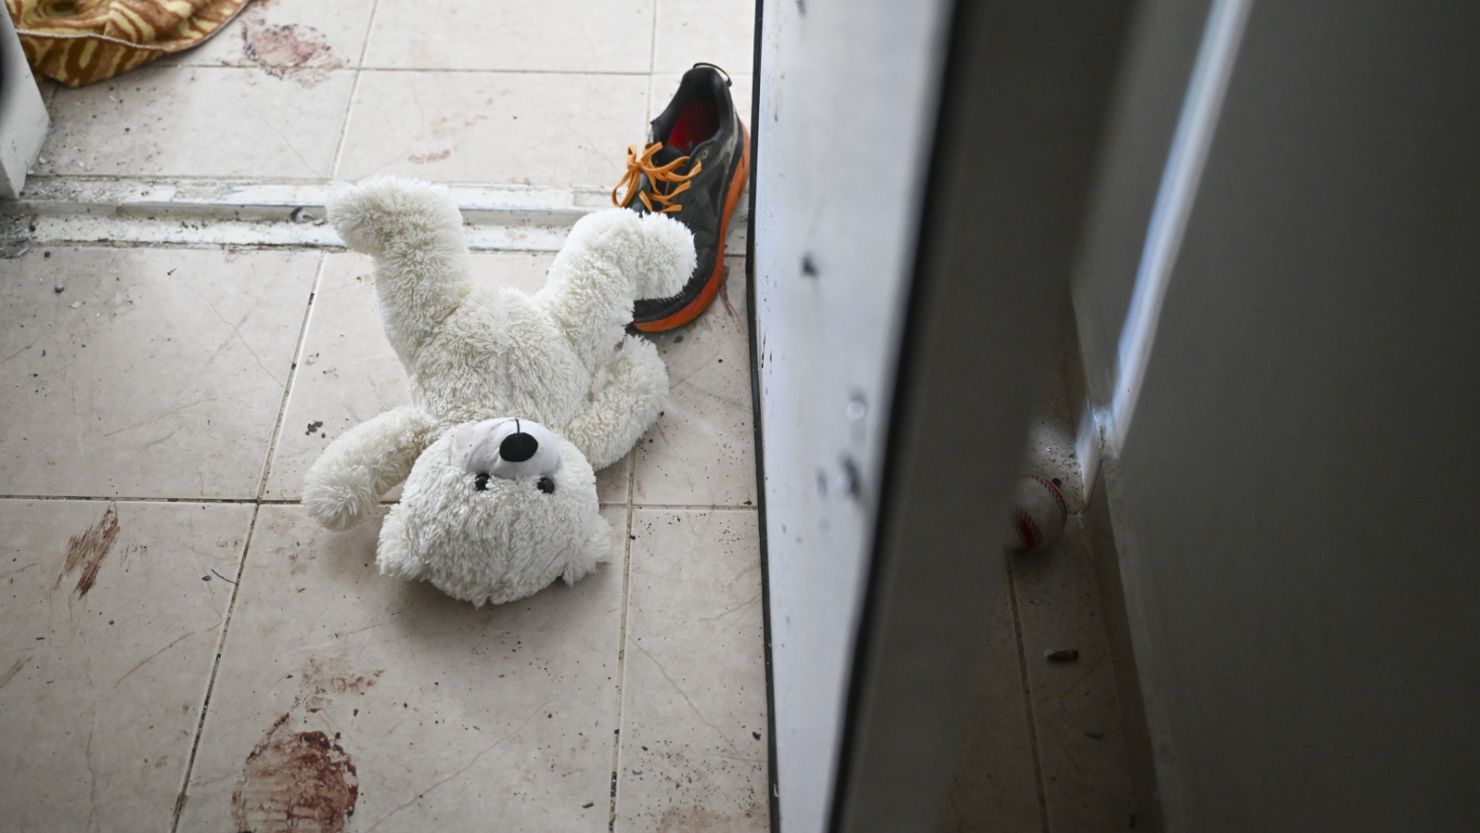 HOLIT, ISRAEL - NOVEMBER 01: A teddy bear is seen left on the ground near the bomb shelter of a kibbutz home attacked by Hamas on Oct 7th, near the border with Gaza, on November 01, 2023 in Holit, Israel. According to an IDF officer, two grandparents who resided here held the bomb shelter door closed during the attack to protect their grandchildren. All were injured but survived. (Photo by Alexi J. Rosenfeld/Getty Images)